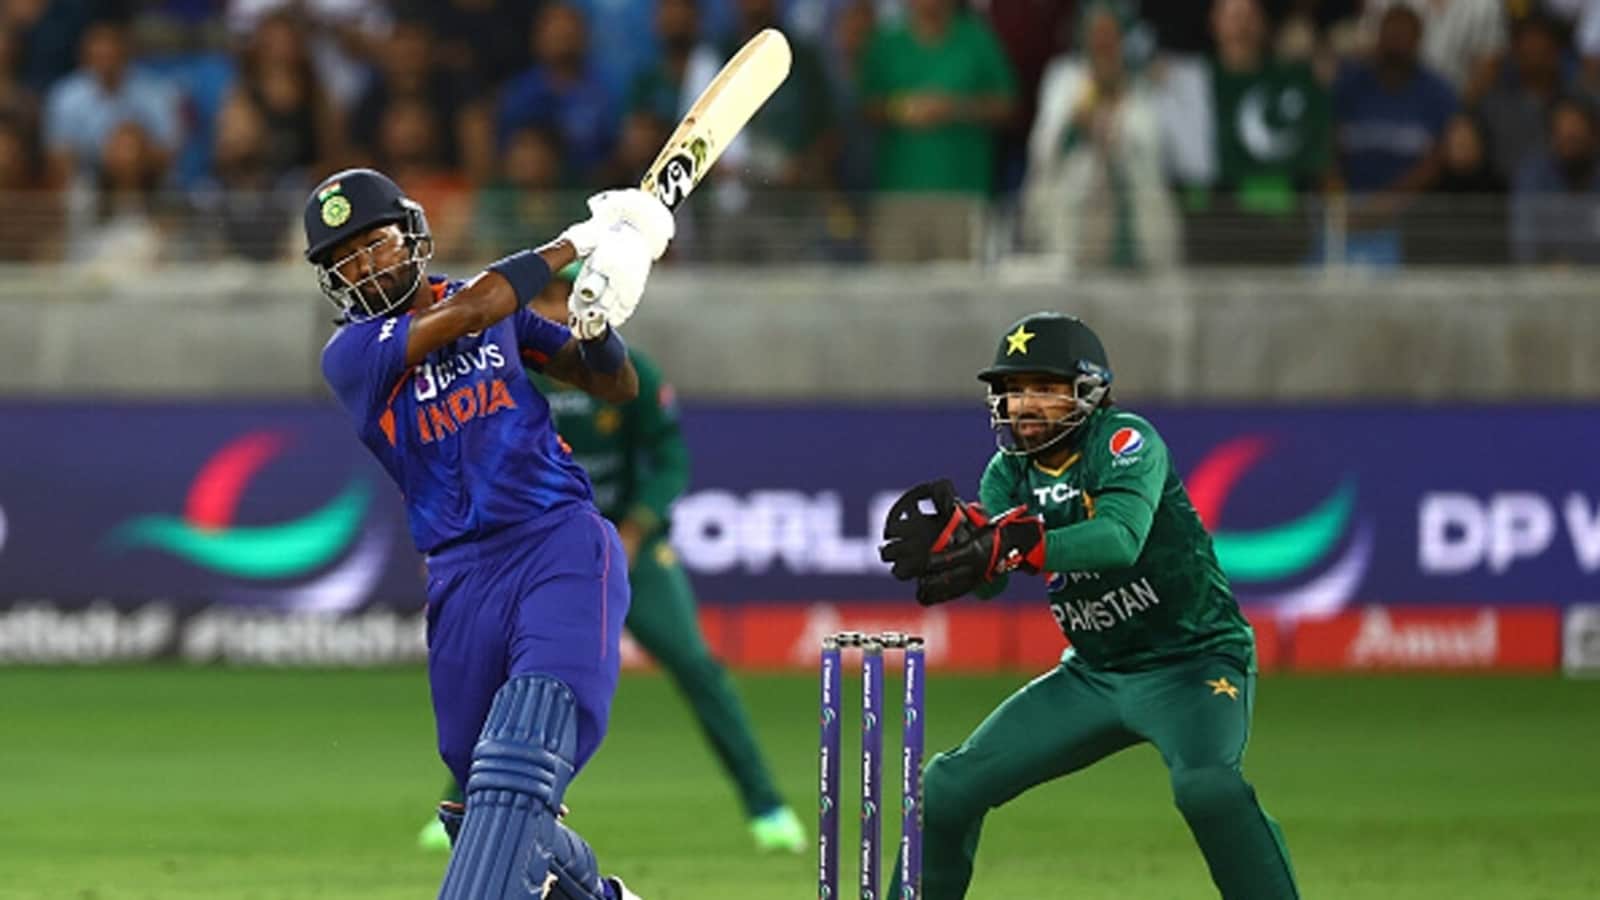 BCCI rejects ECB's proposal of India-Pakistan series in England